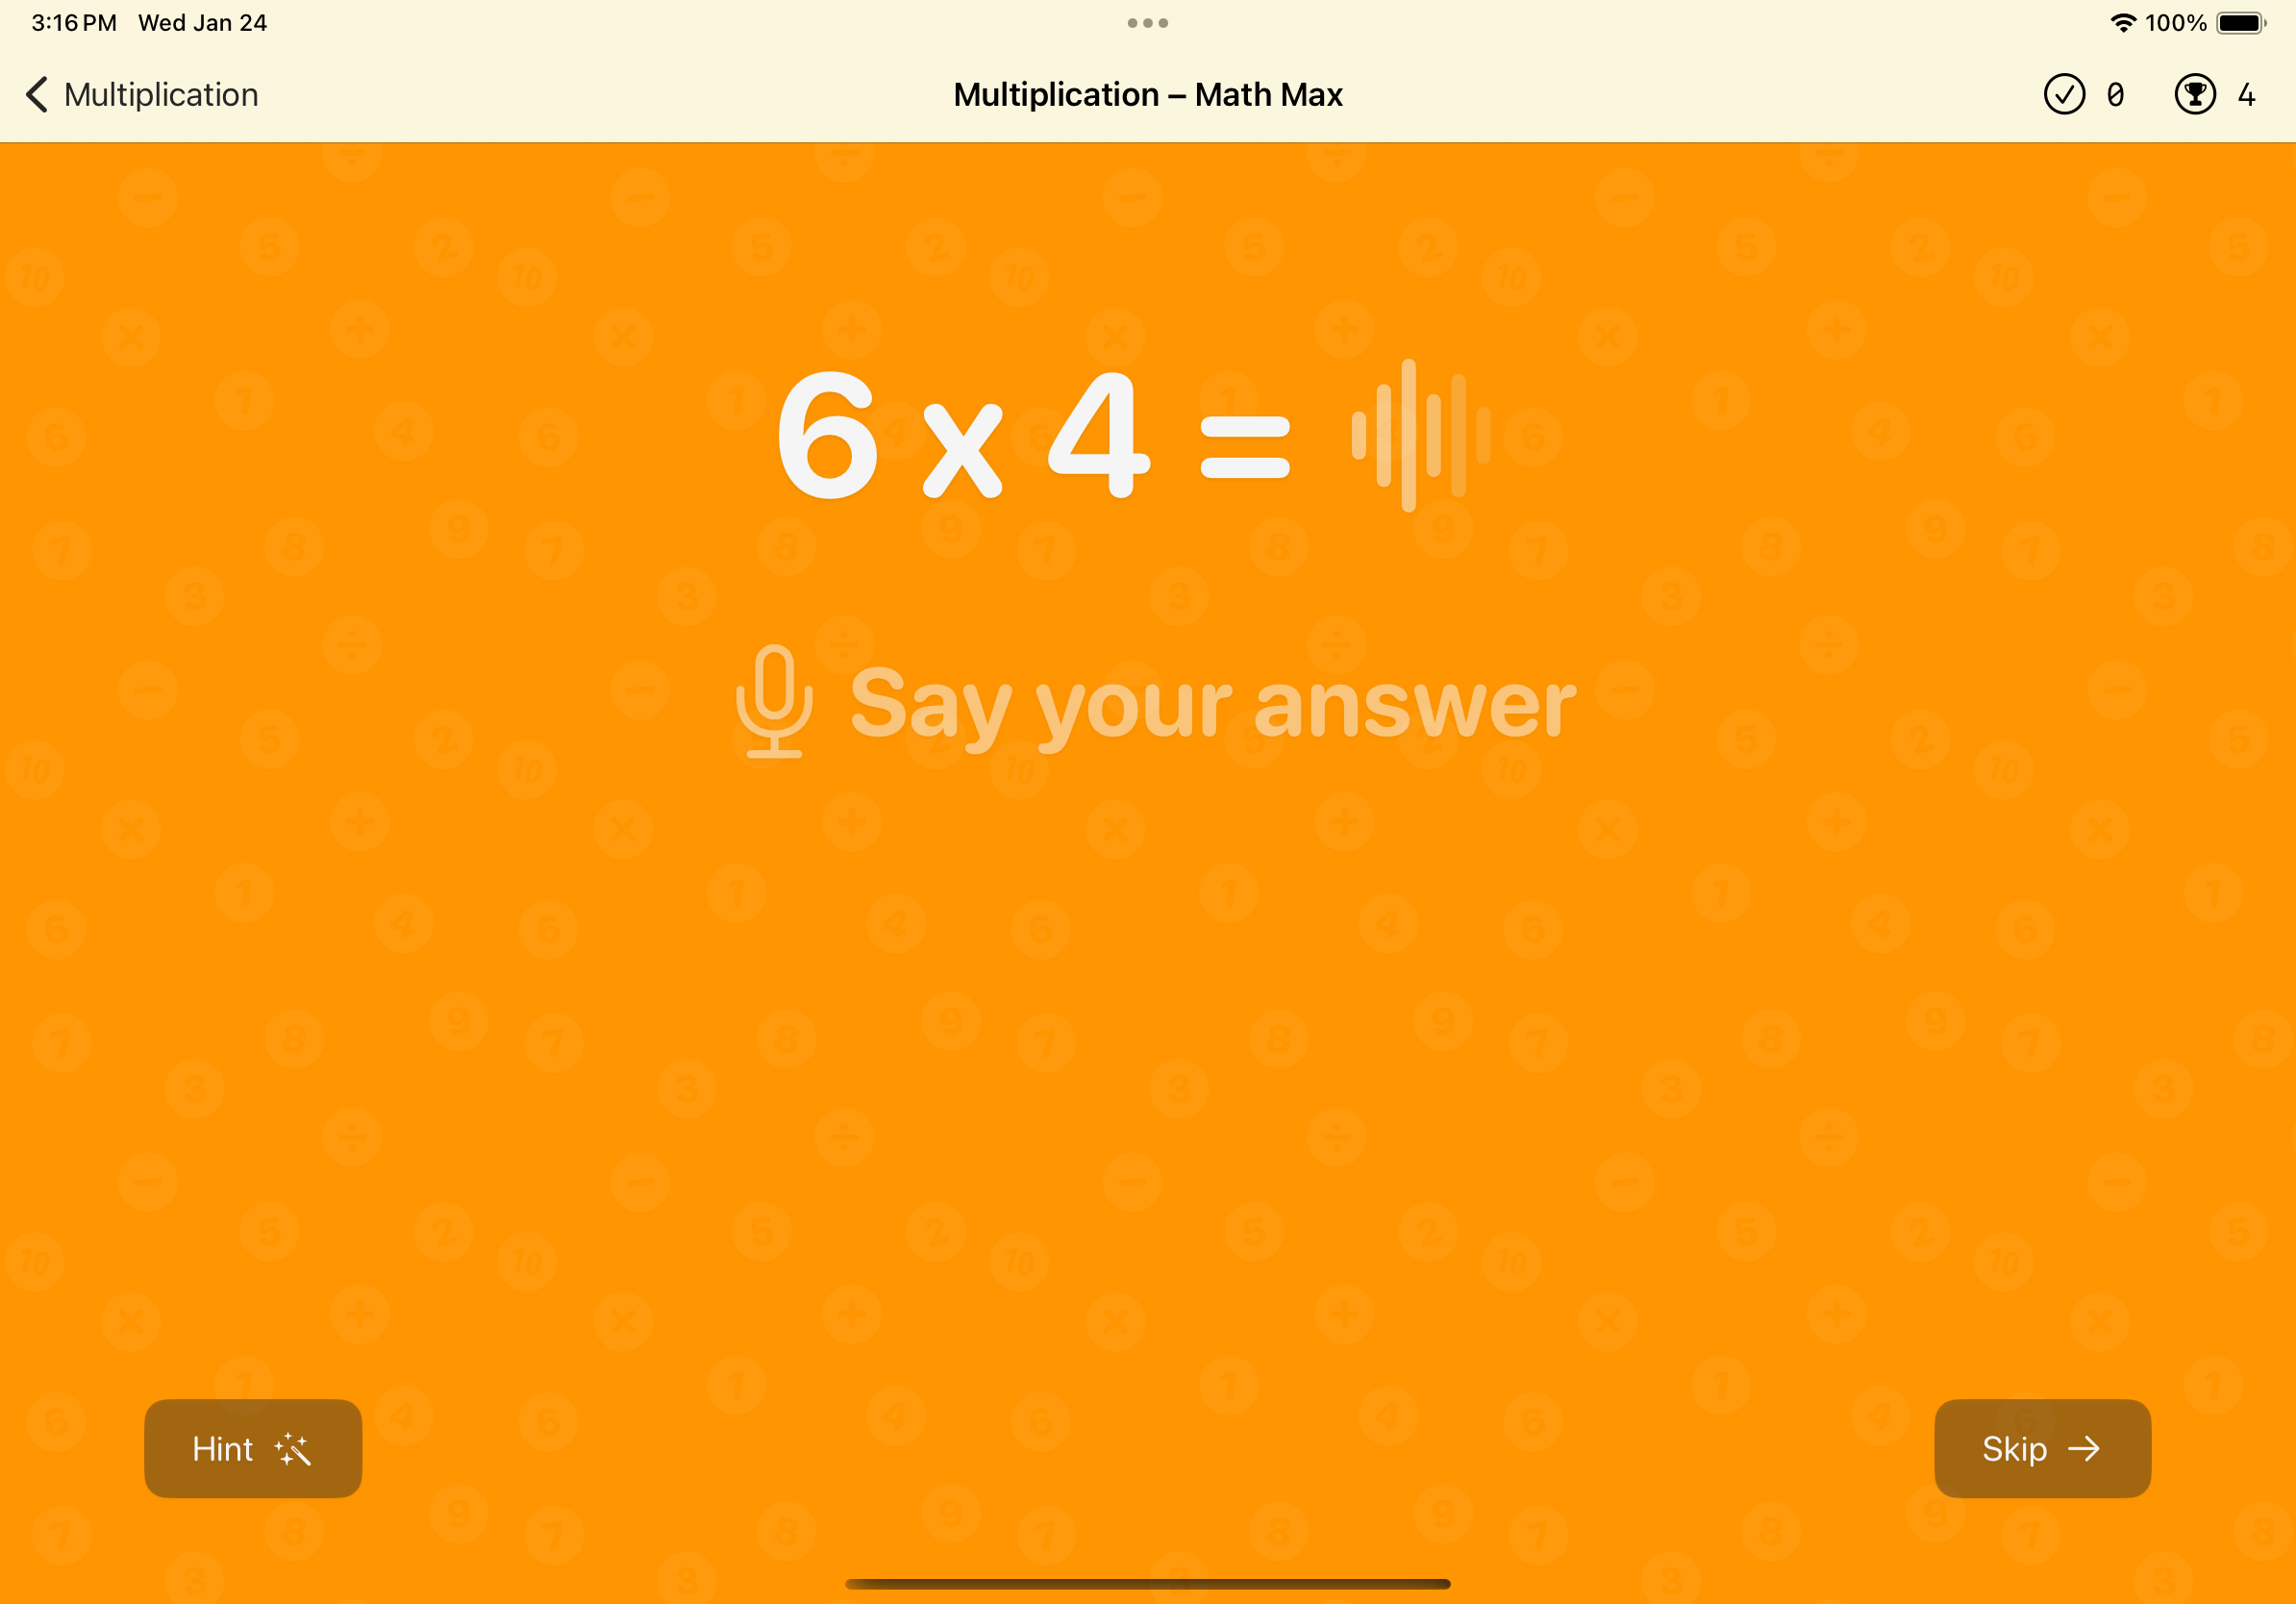 Multiplication practice screen showing a math problem